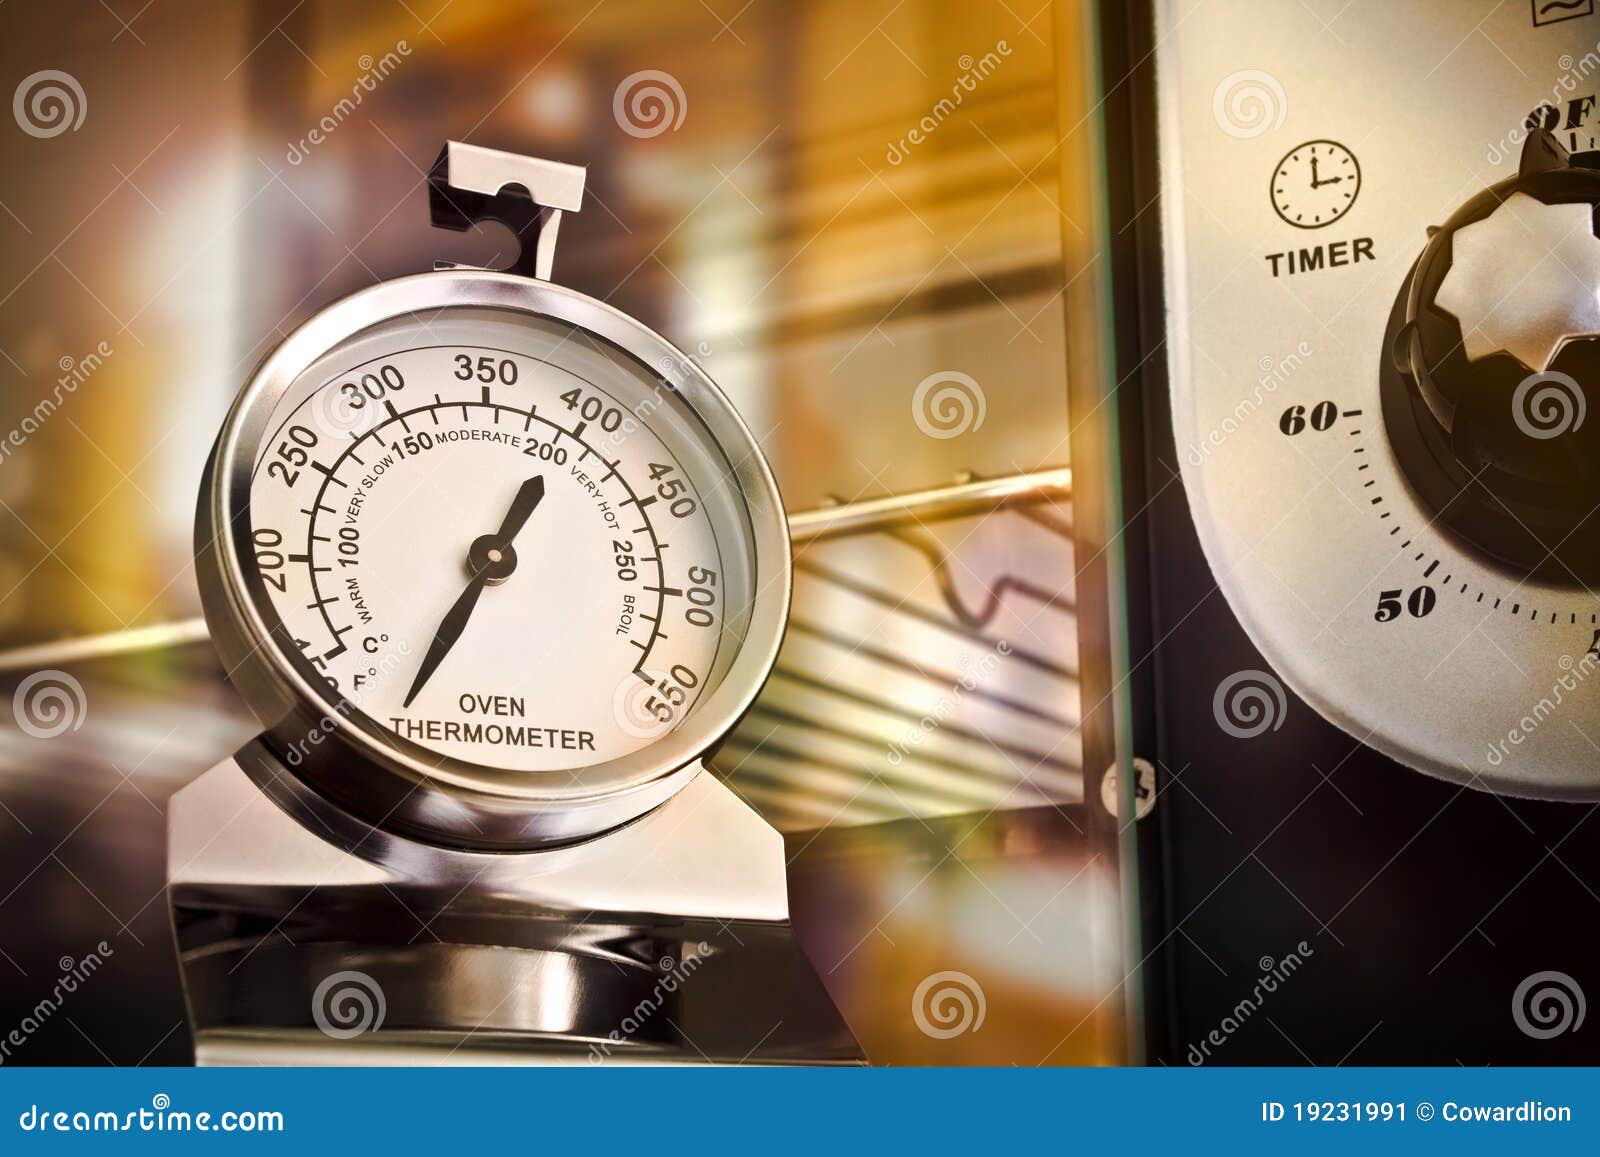 https://thumbs.dreamstime.com/z/oven-thermometer-19231991.jpg